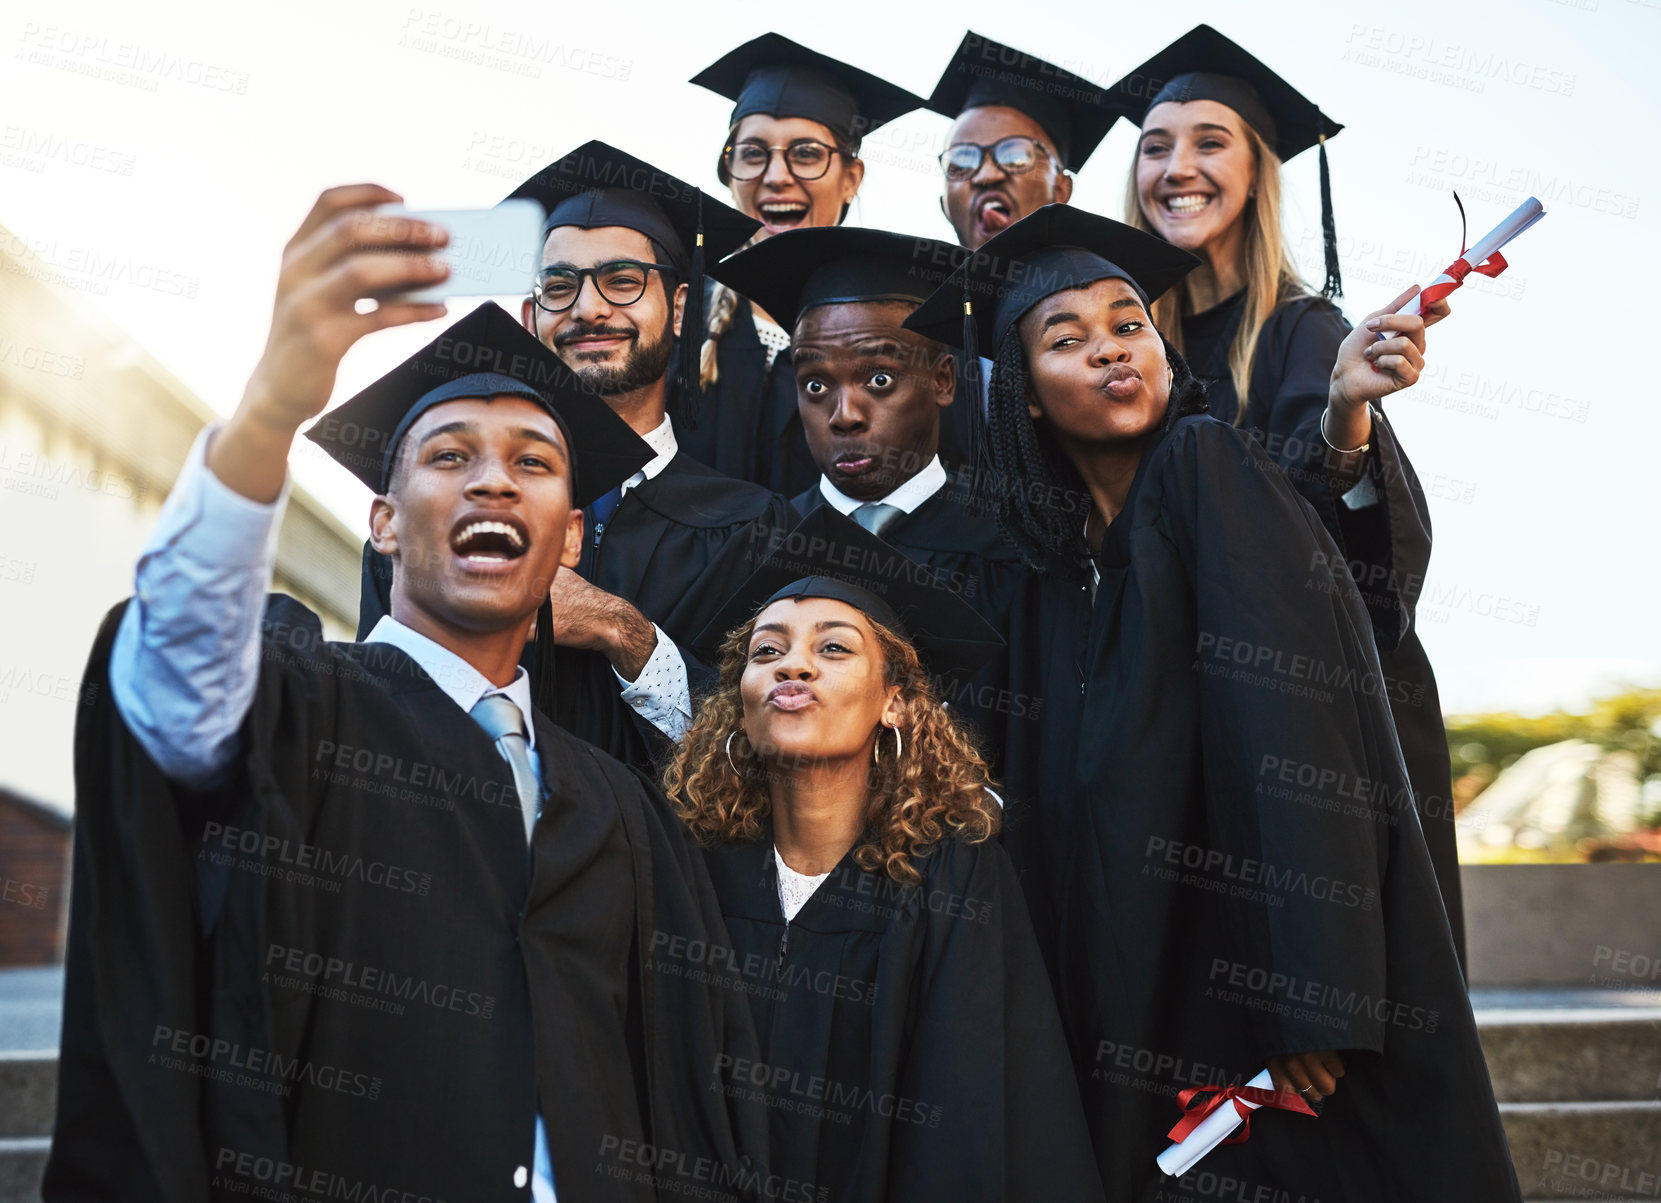 Buy stock photo Shot of a group of students taking a selfie on graduation day